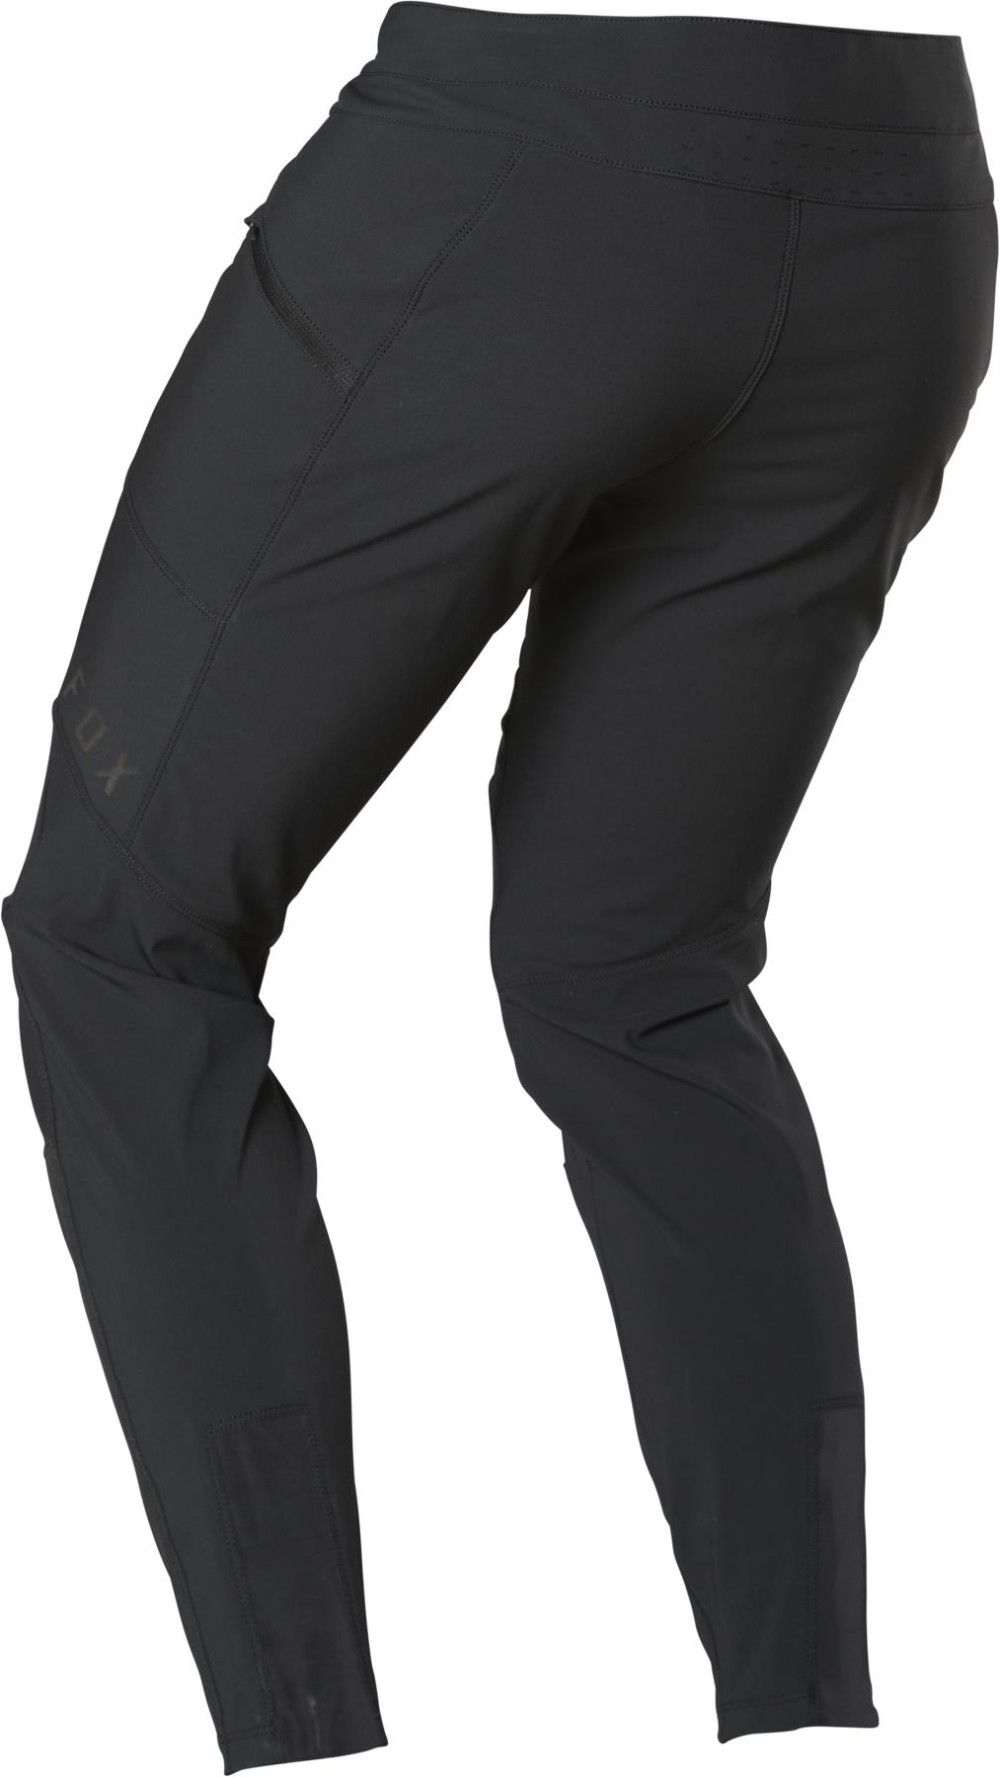 Defend Fire MTB Cycling Trousers image 1